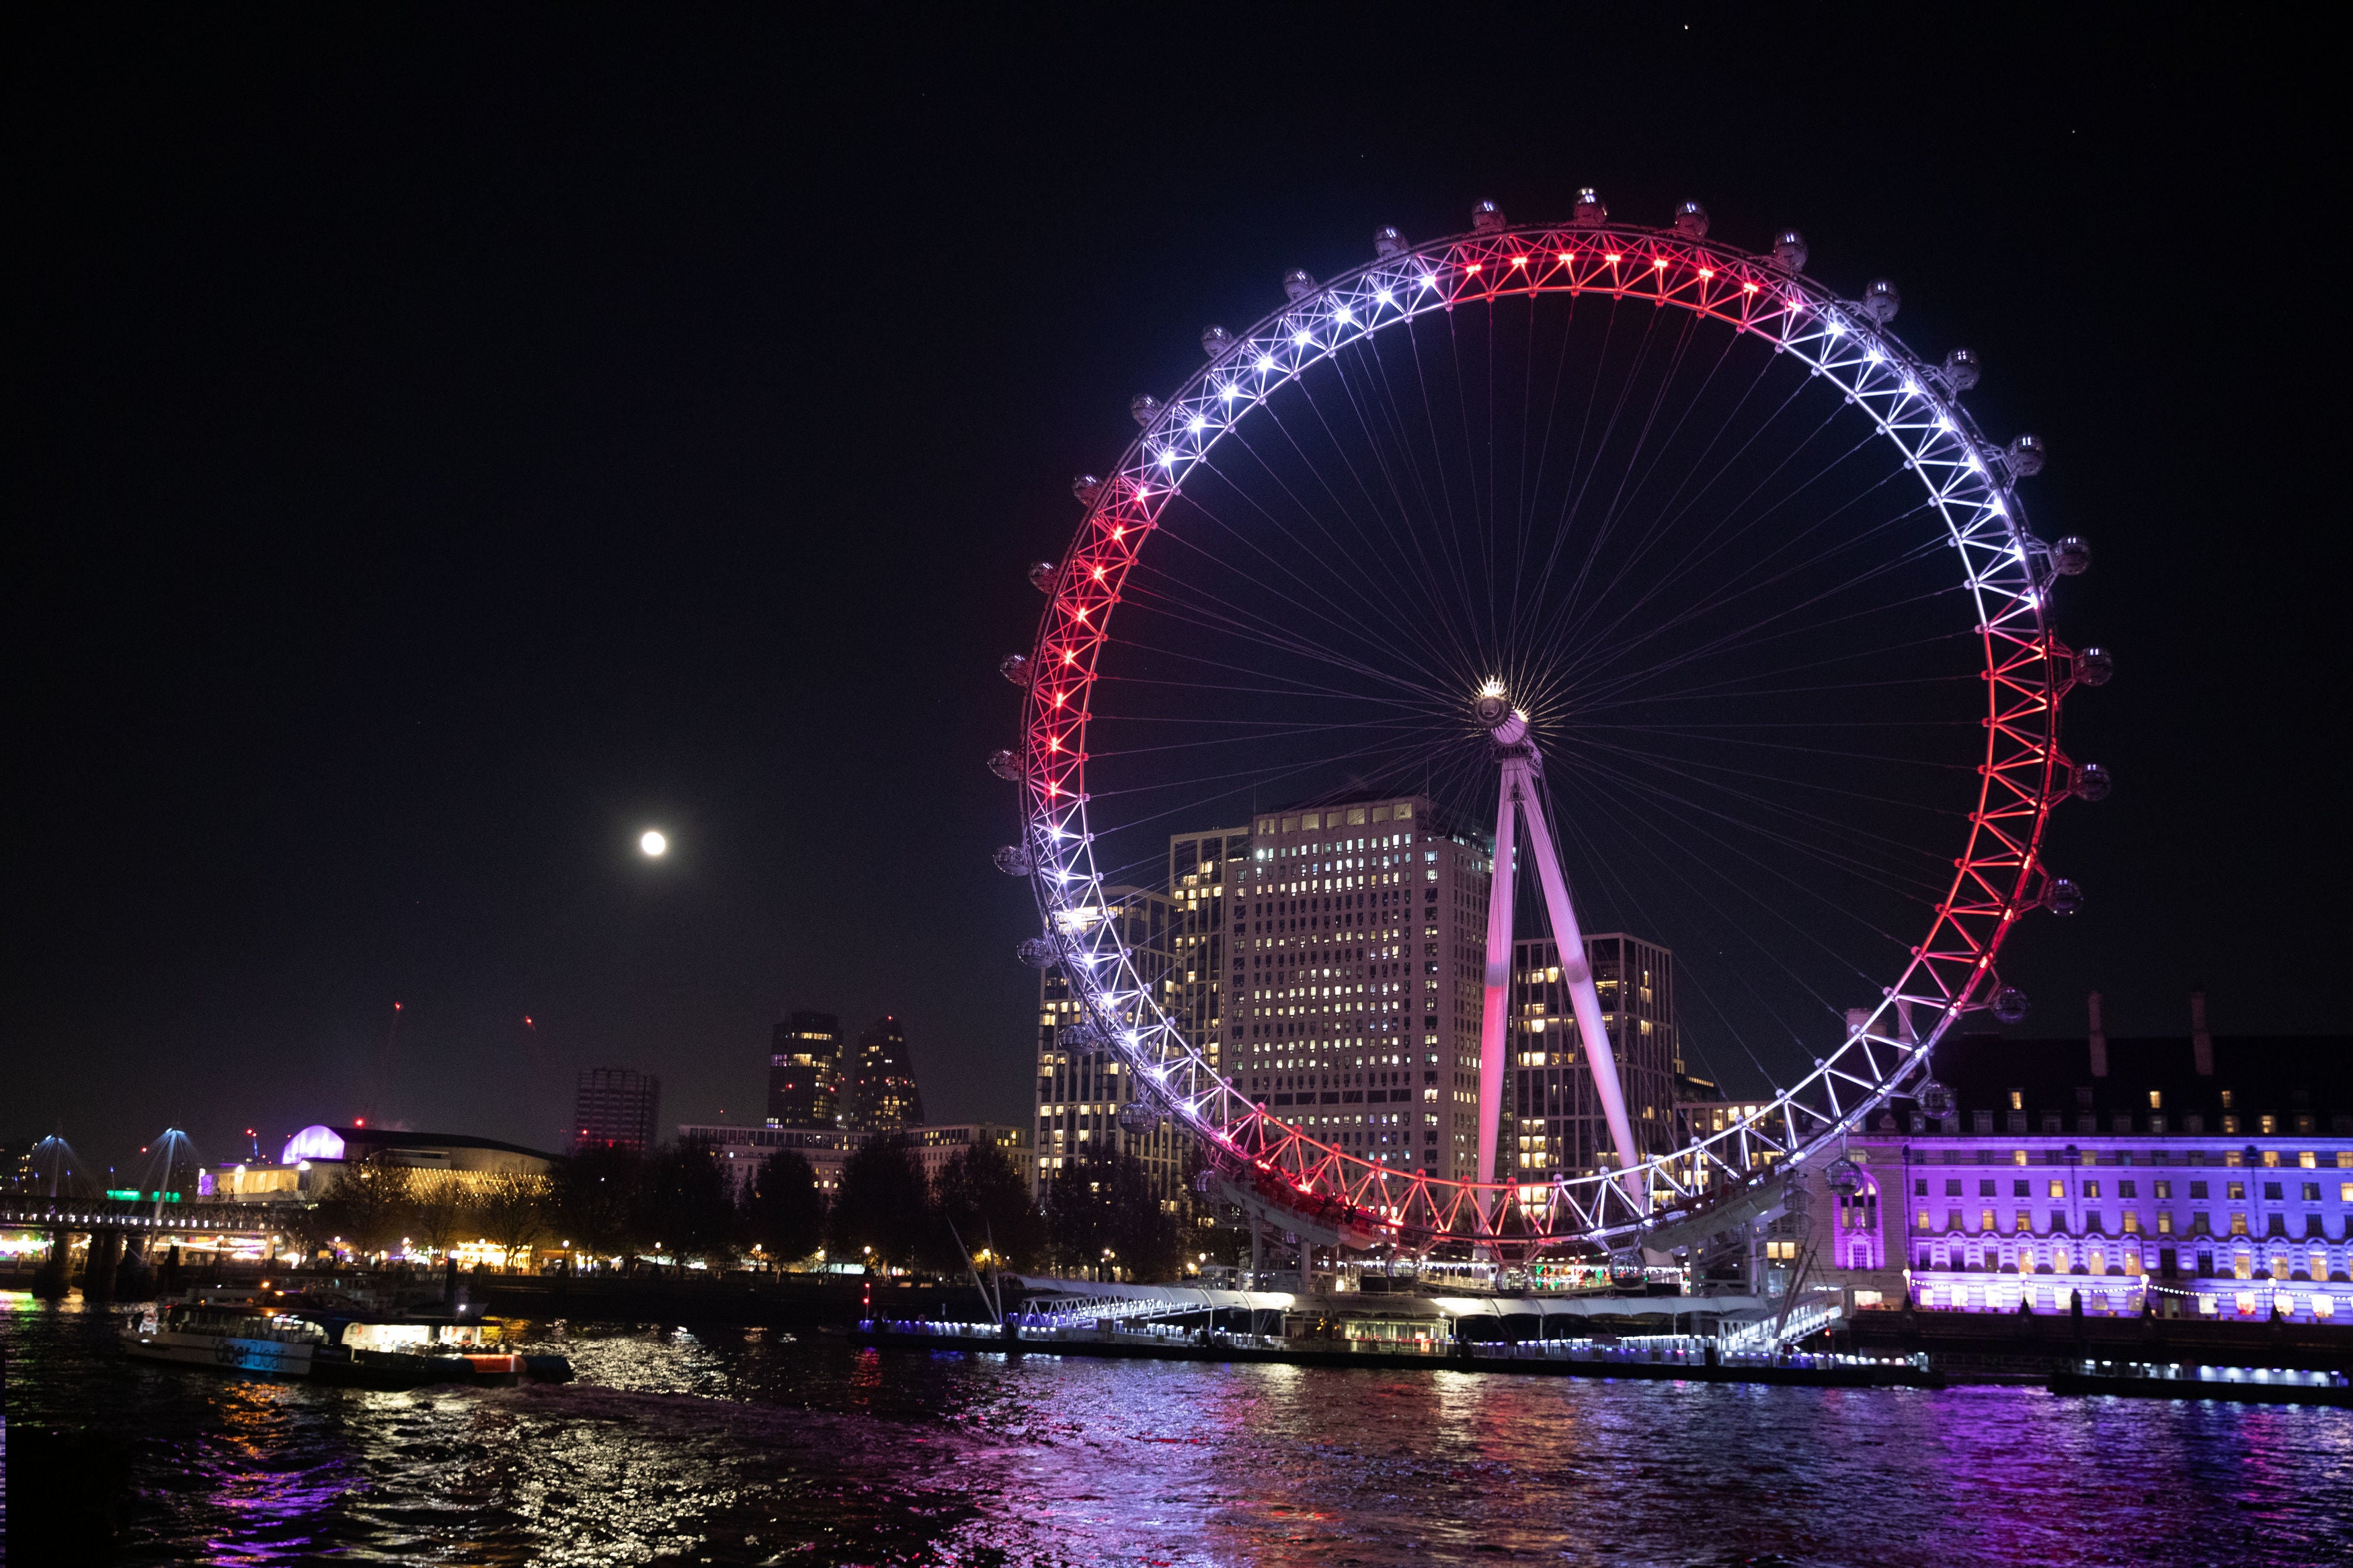 The London Eye was rated the capital’s most disappointing attraction